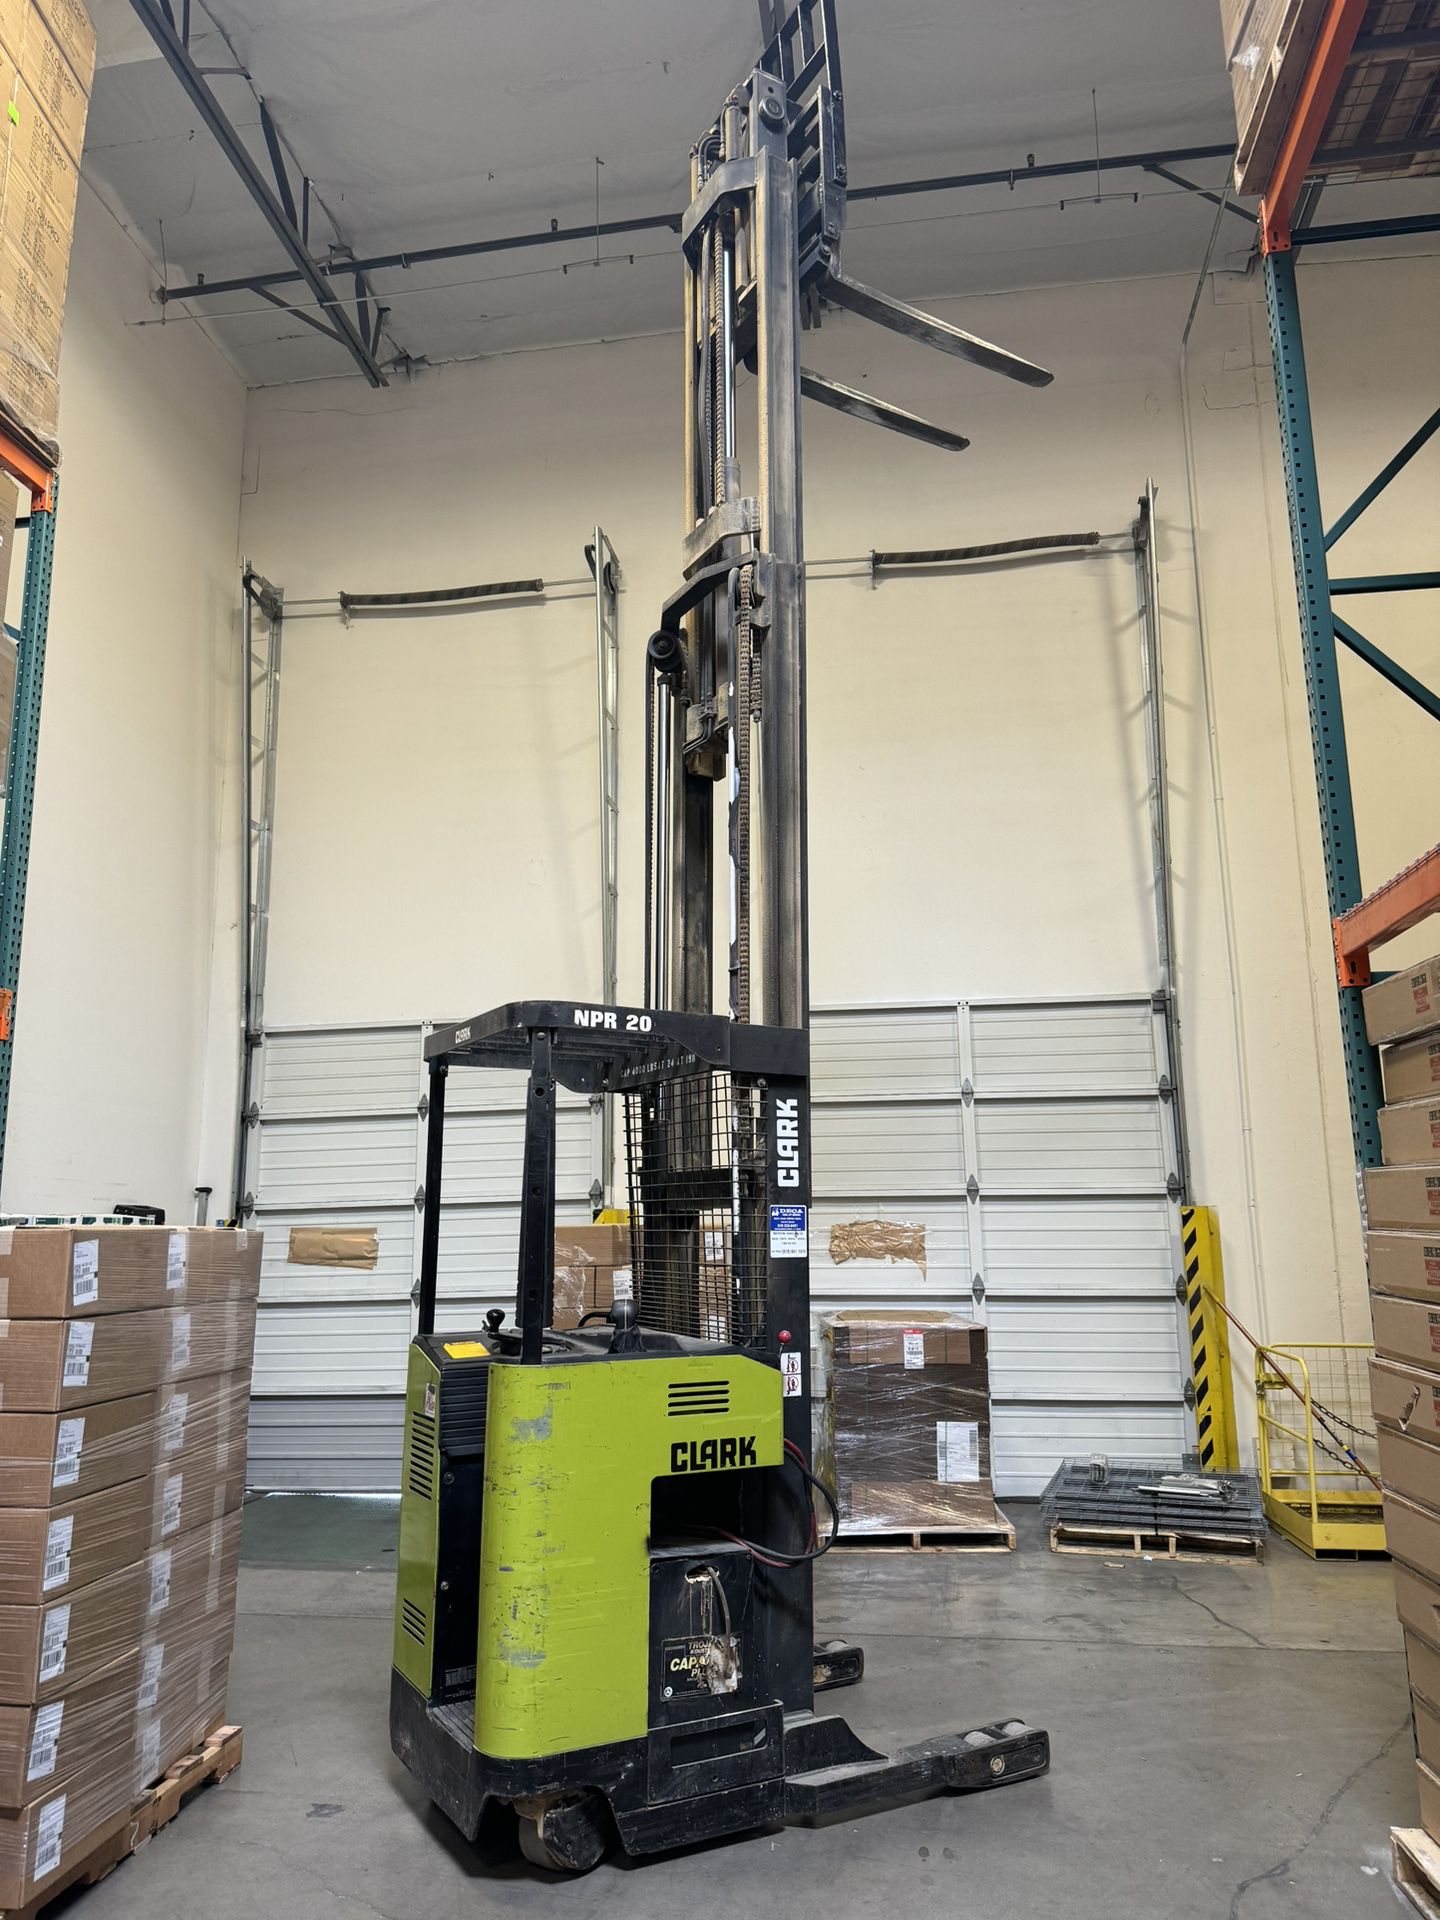 Clark NPR20 Electric Reach Forklift 4,000lb Capacity, 3 Stage, 198” Lift